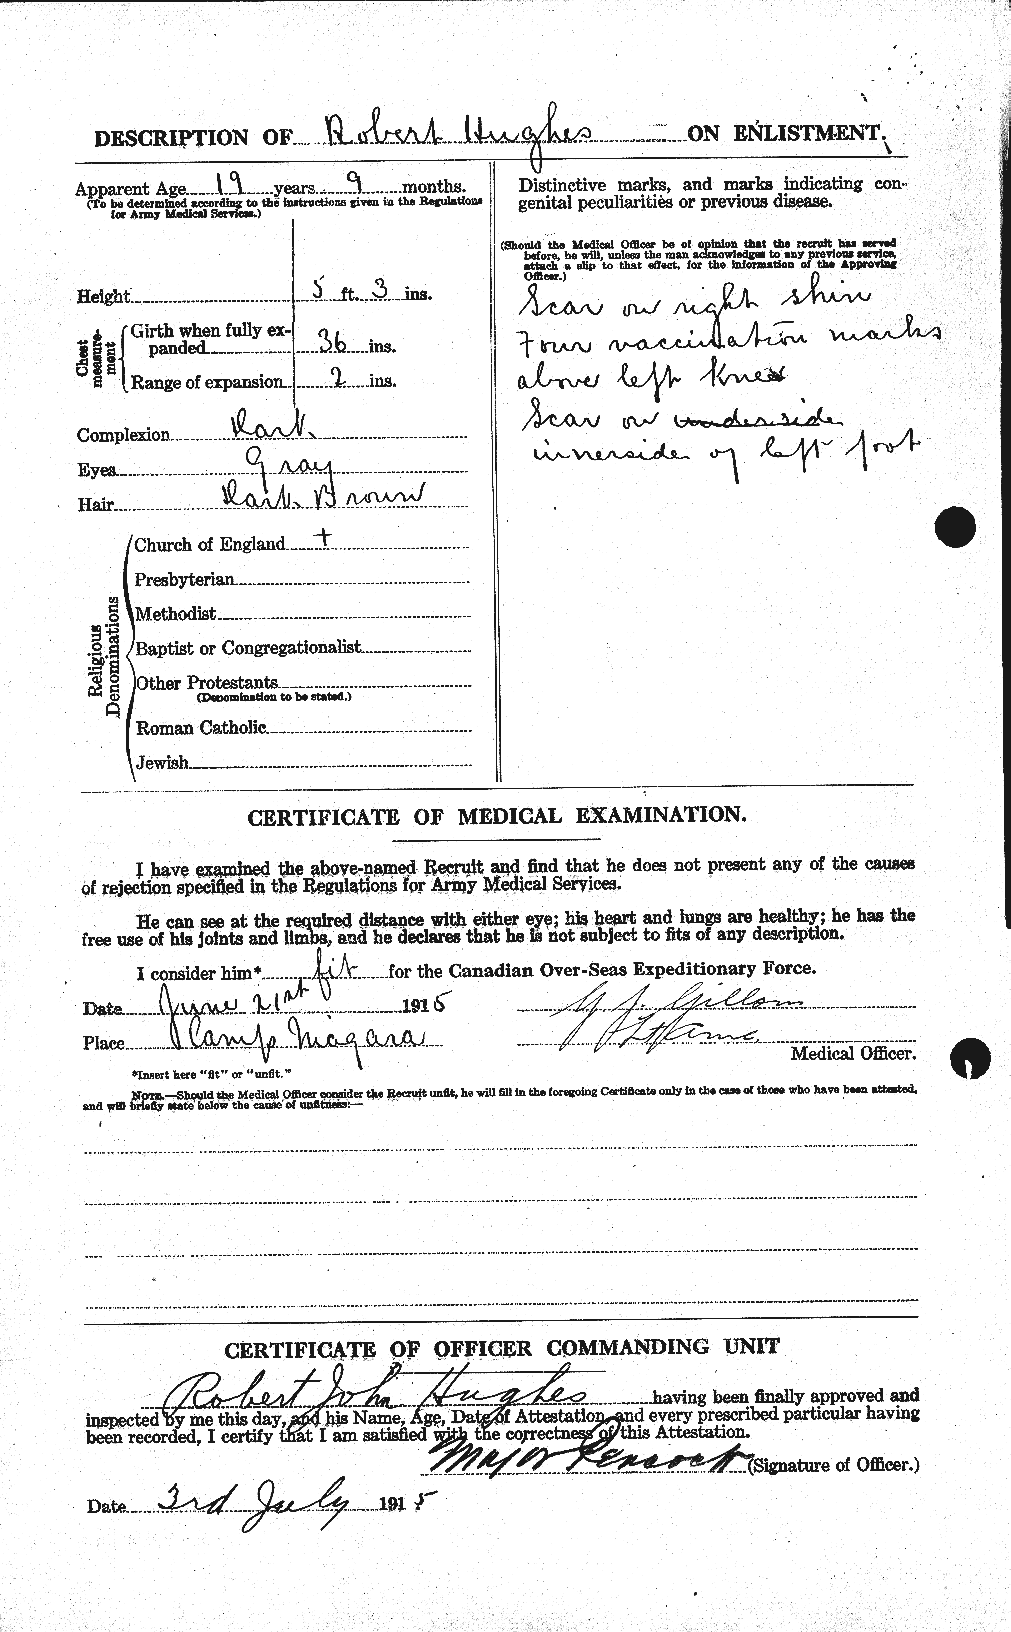 Personnel Records of the First World War - CEF 404193b